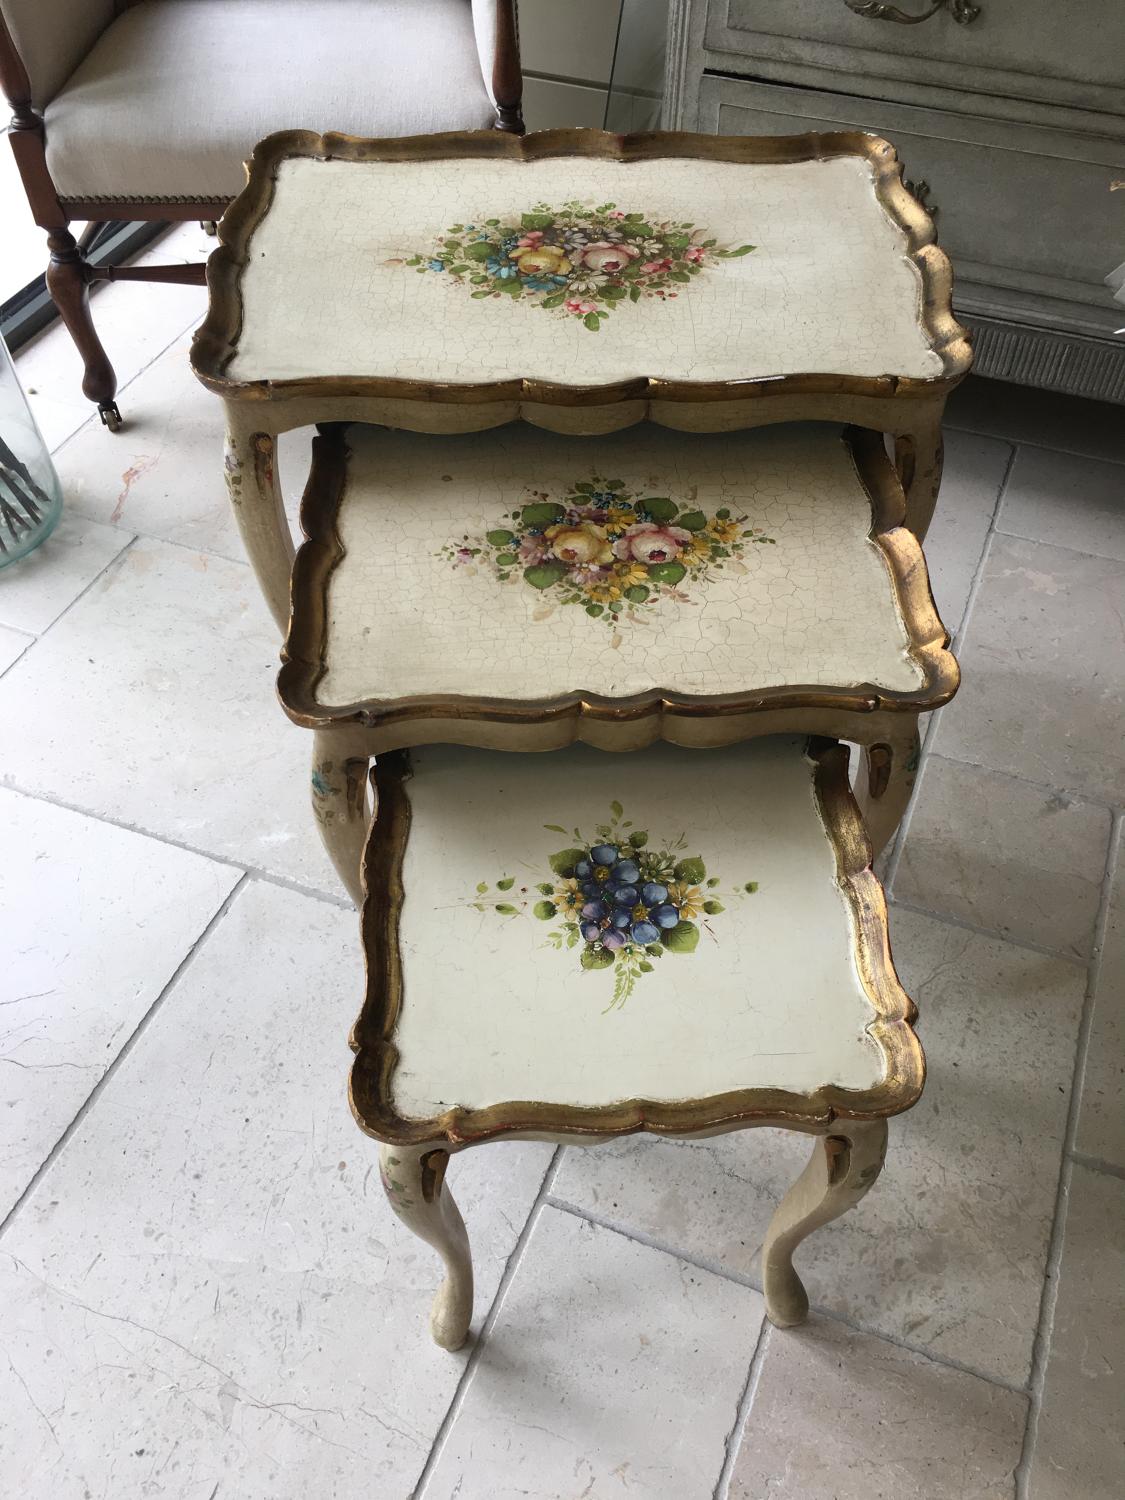 Set of three painted wooden tables